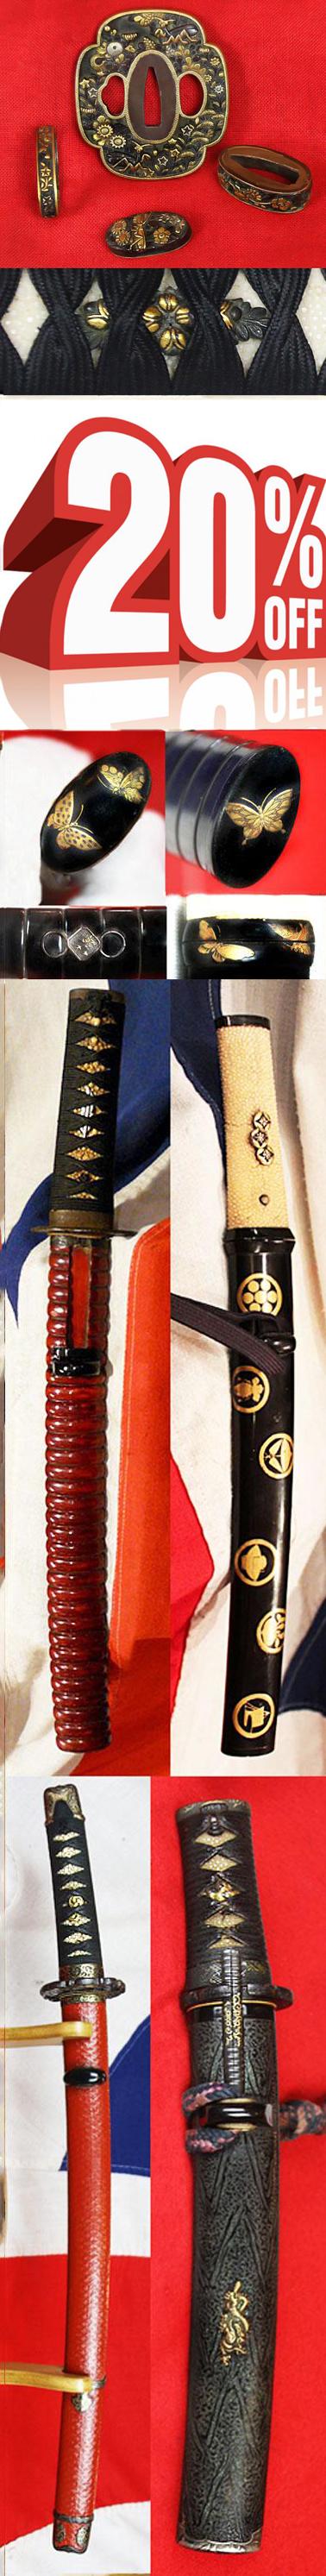 VERY SPECIAL 'VALENTINES DAY' ANTIQUE SAMURAI SWORD DISCOUNT VALENTINES DAY  20% OFF THROUGHOUT THE WHOLE SAMURAI SWORD, SAMURAI ARMS AND ARMOUR DEPARTMENT. For your special loved one, or indeed, just for you!